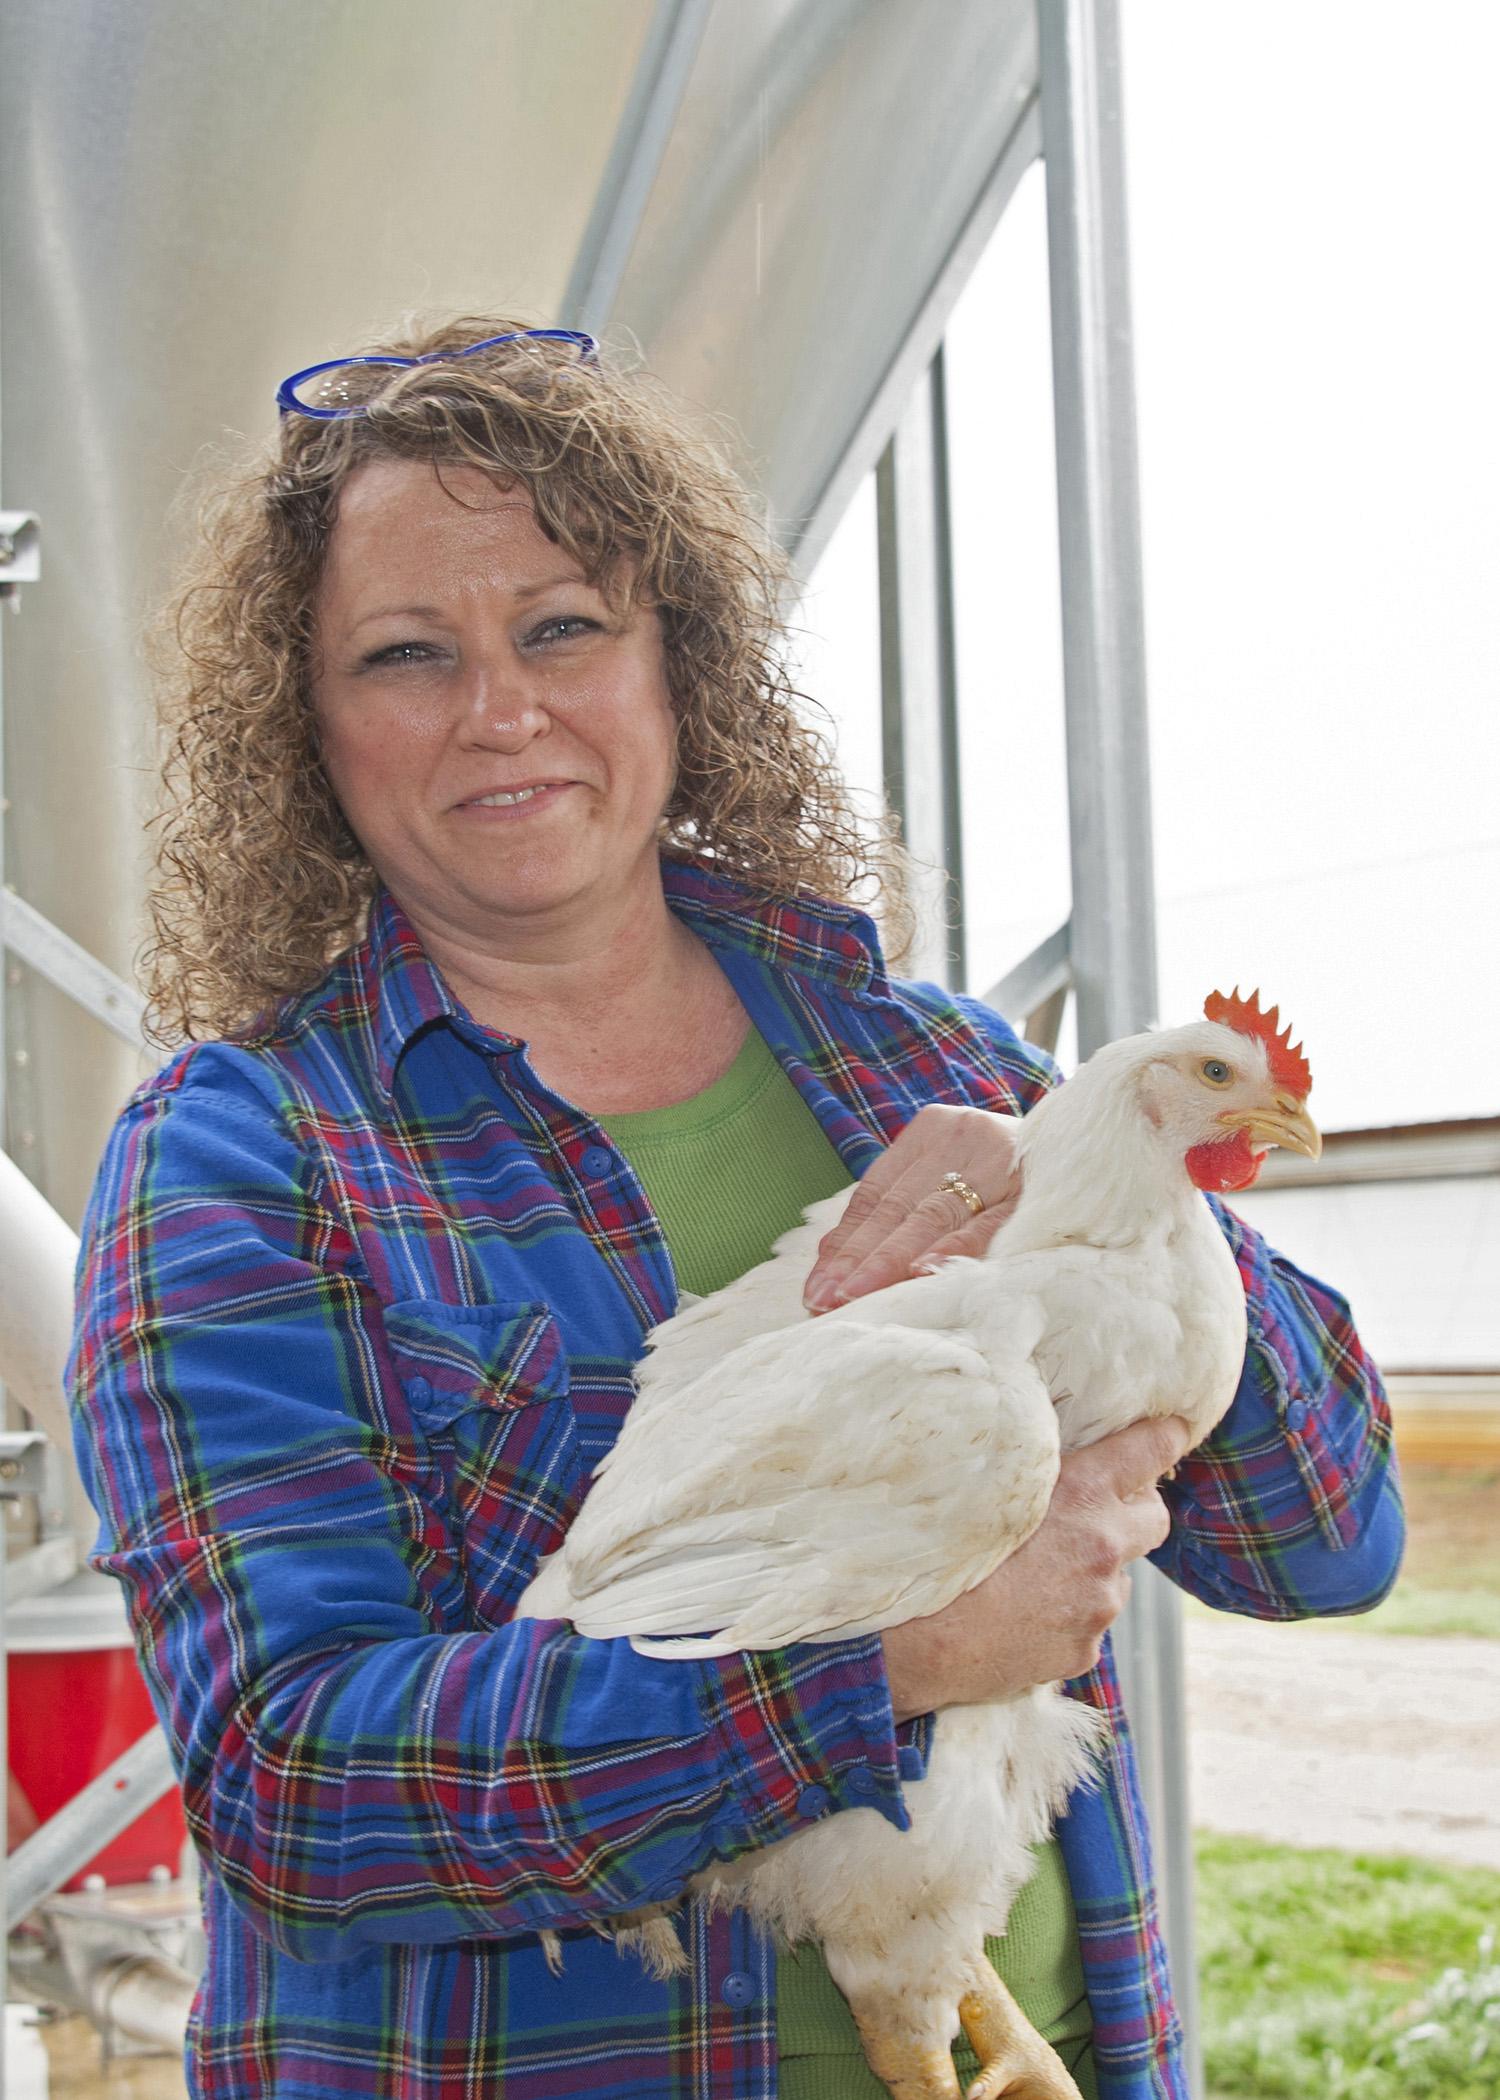 Delean Robertson holds one of her chickens at her poultry farm, Straight Arrow Farm in McComb. Robertson is a member of Mississippi Women for Agriculture and strives to educate others about women's important role in the agriculture industry. (Photo by MSU Ag Communications/Kat Lawrence)